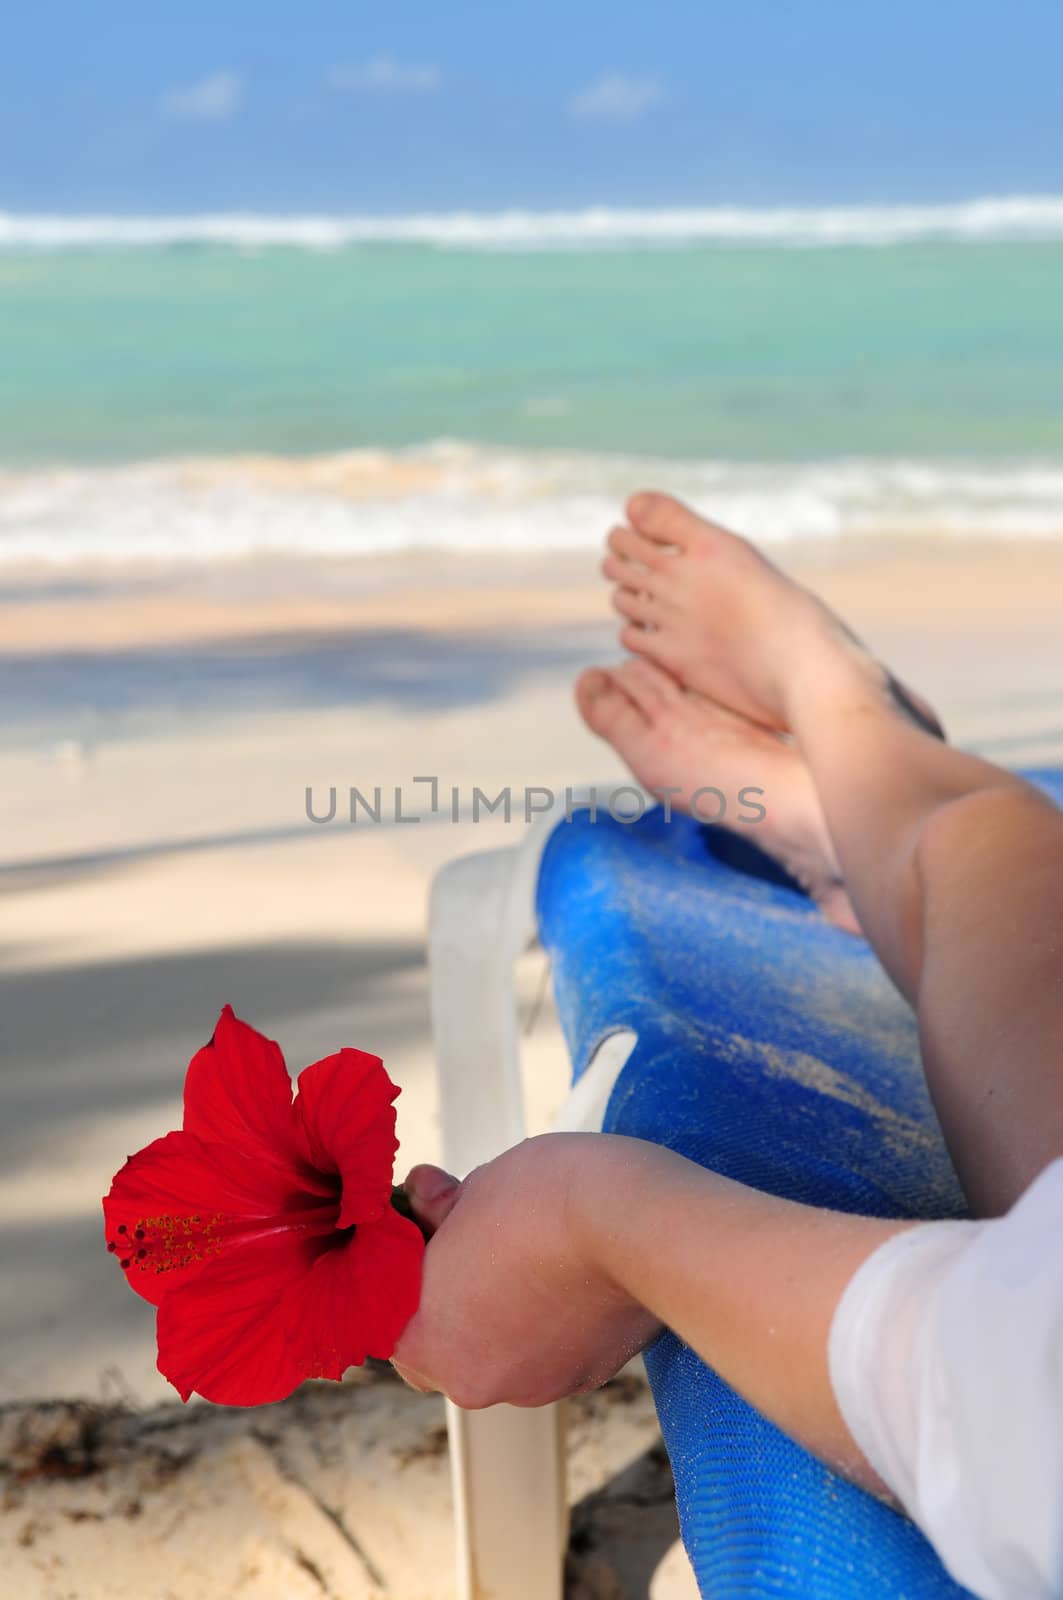 Young woman relaxing on a tropical beach holding a red flower